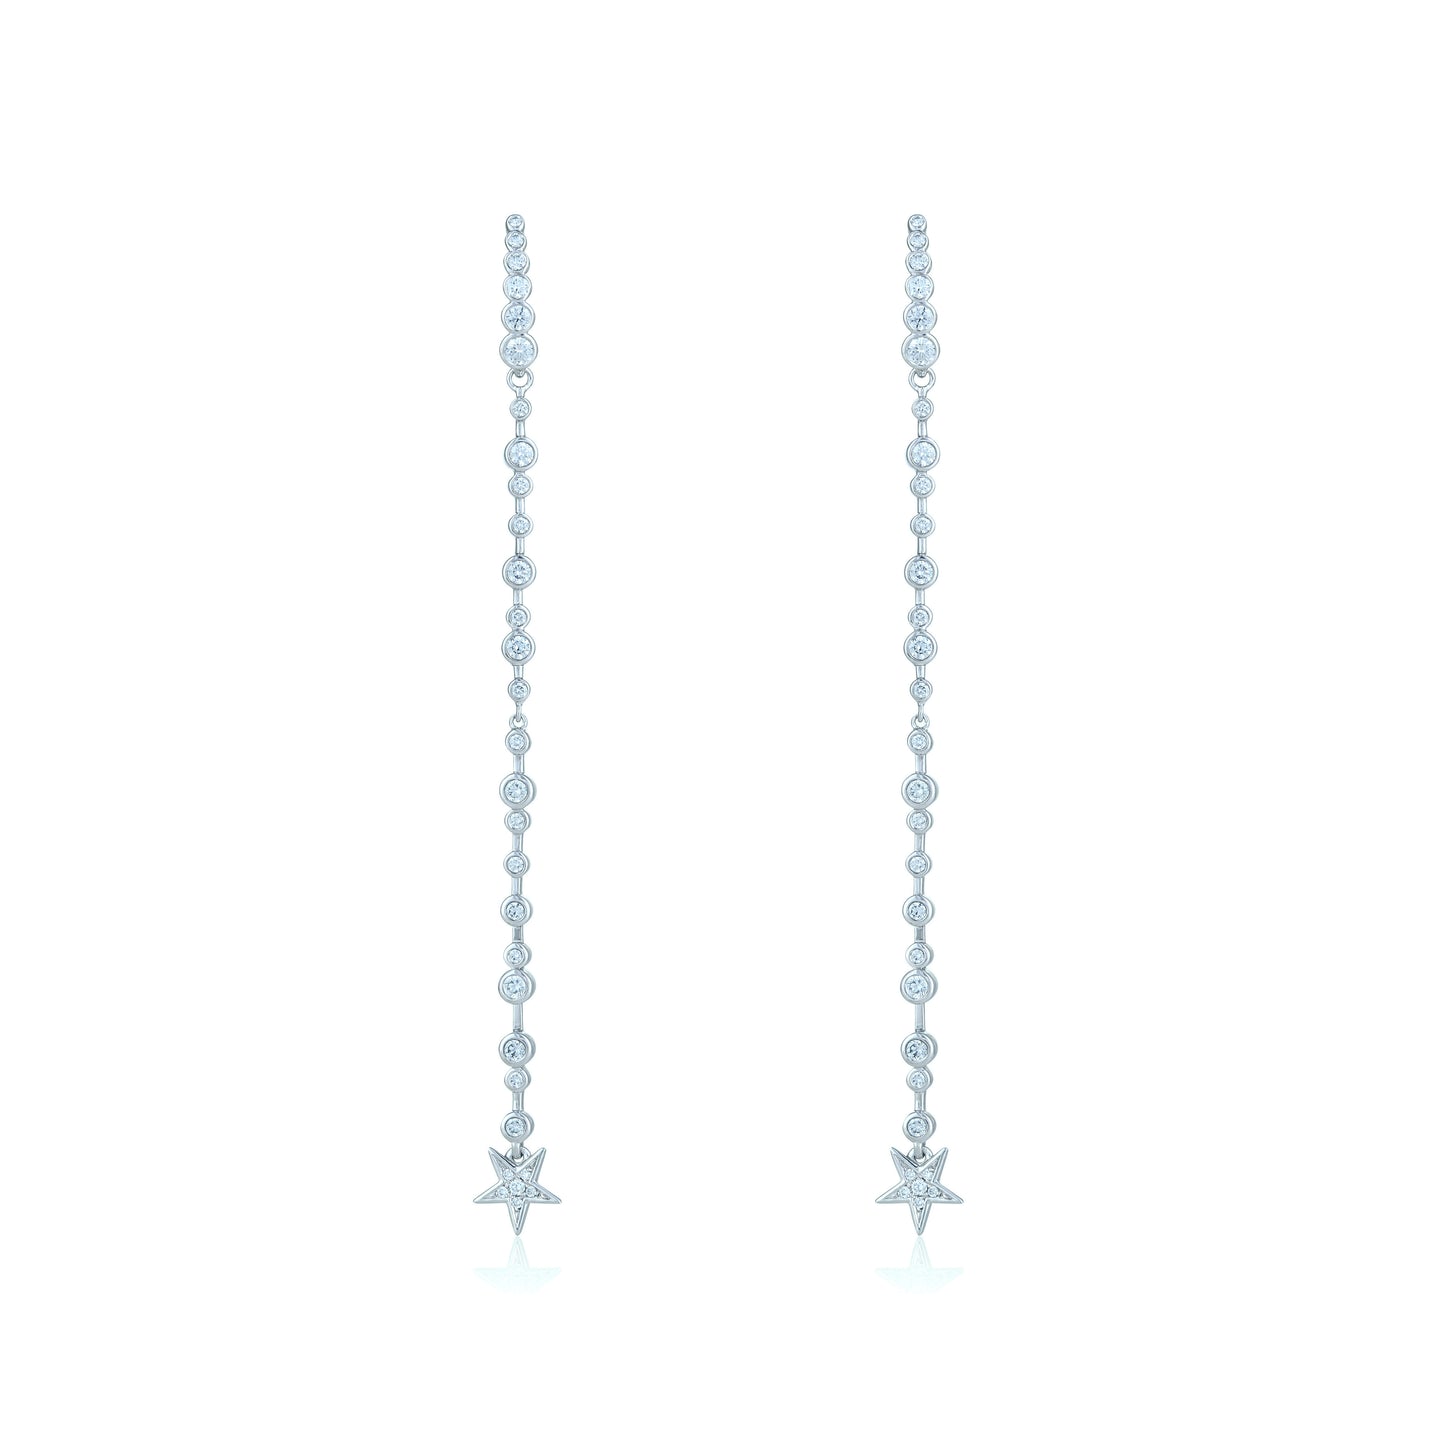 Guiding Star 18ct White Gold & Diamond Extra Long Drop Earrings